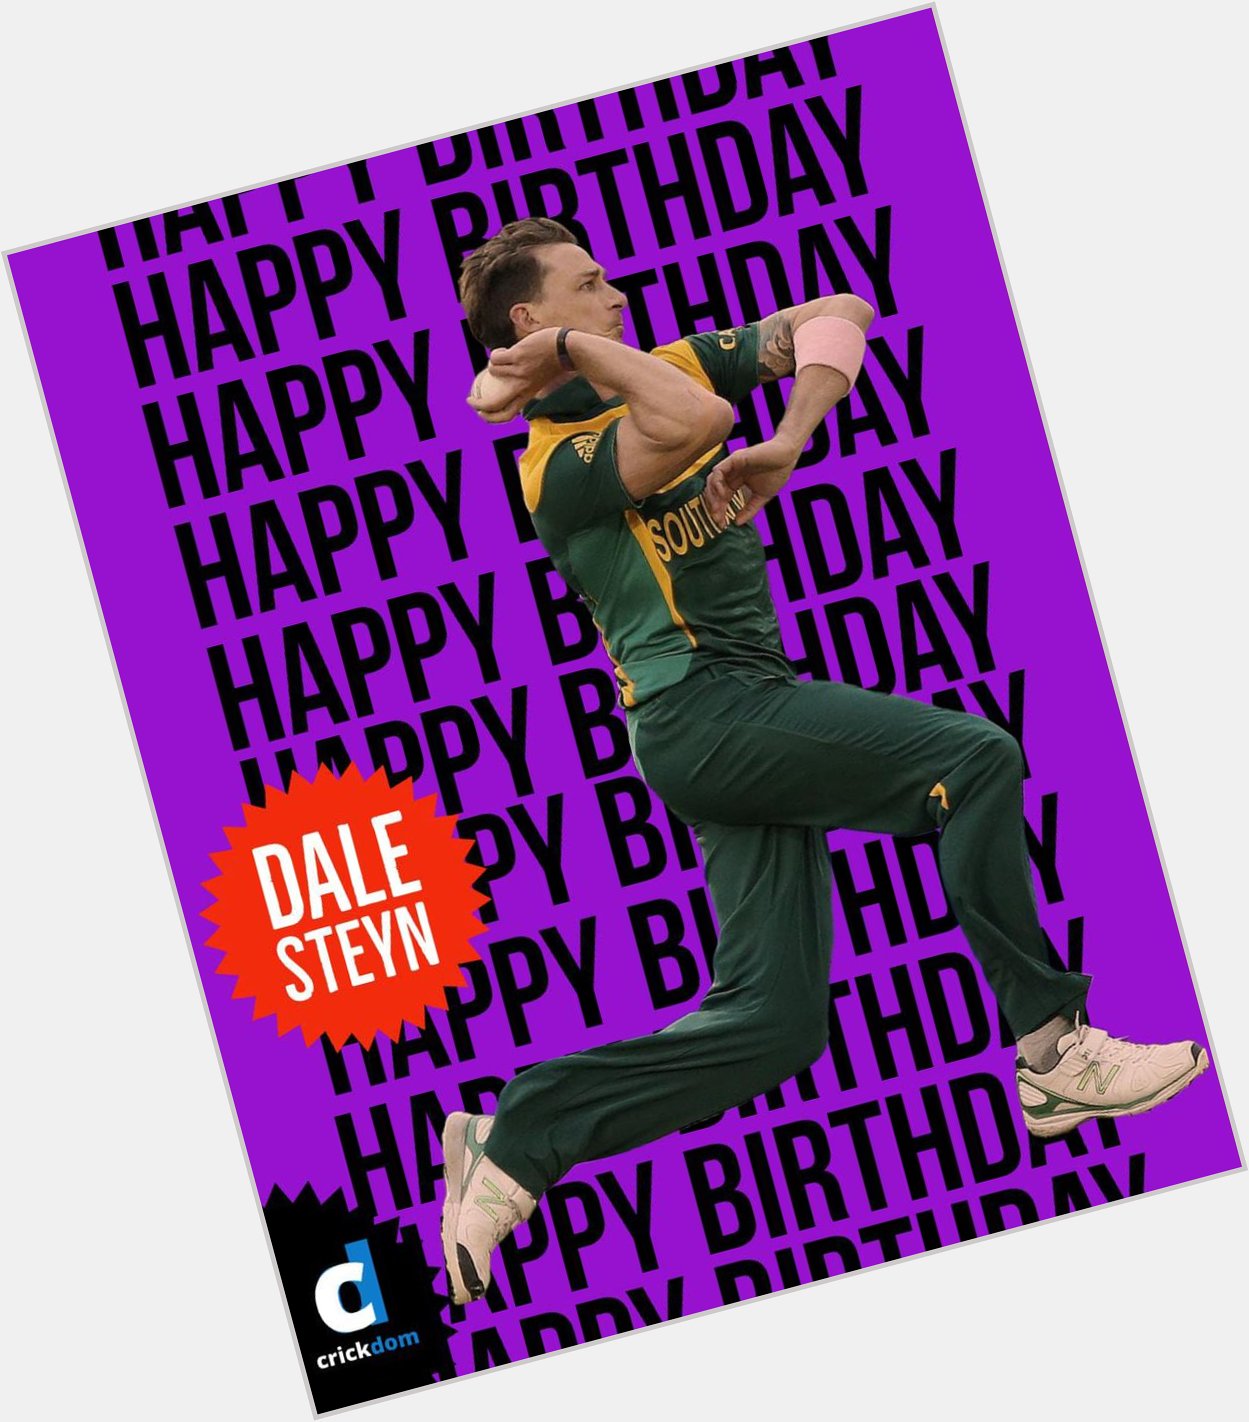 Dale Steyn - The legend, one of the greatest bowler in test history.

Happy Birthday  